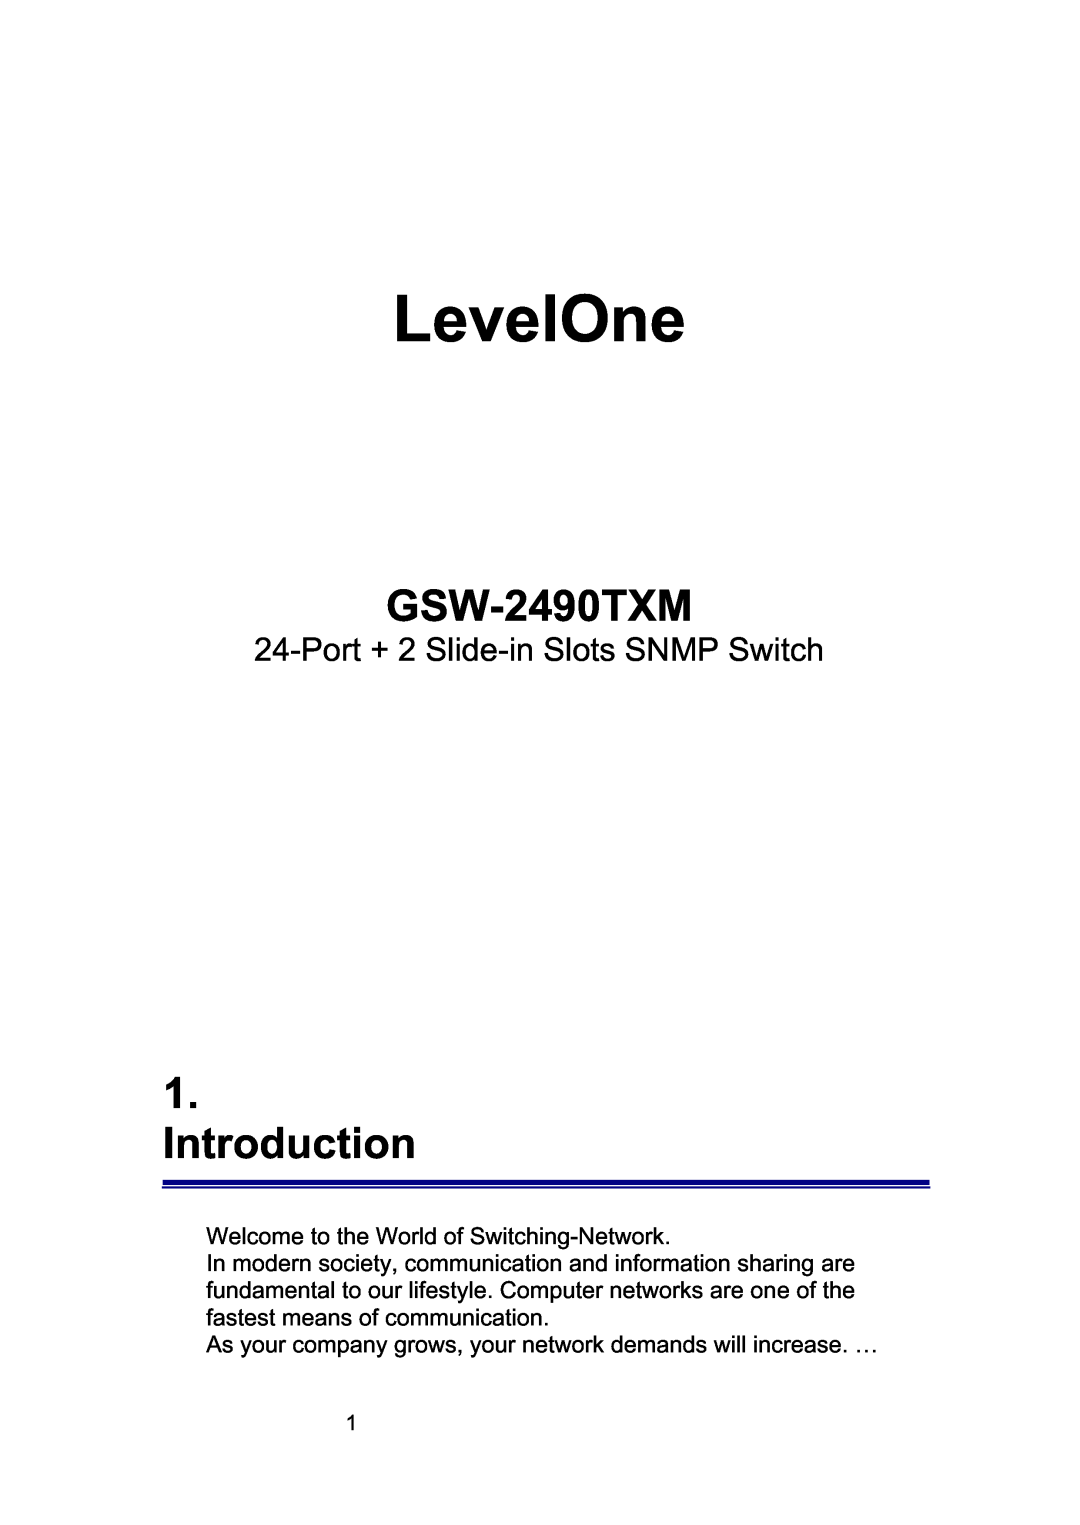 LevelOne GSW-2490TXM manual Introduction, LevelOne, Port + 2 Slide-in Slots SNMP Switch 